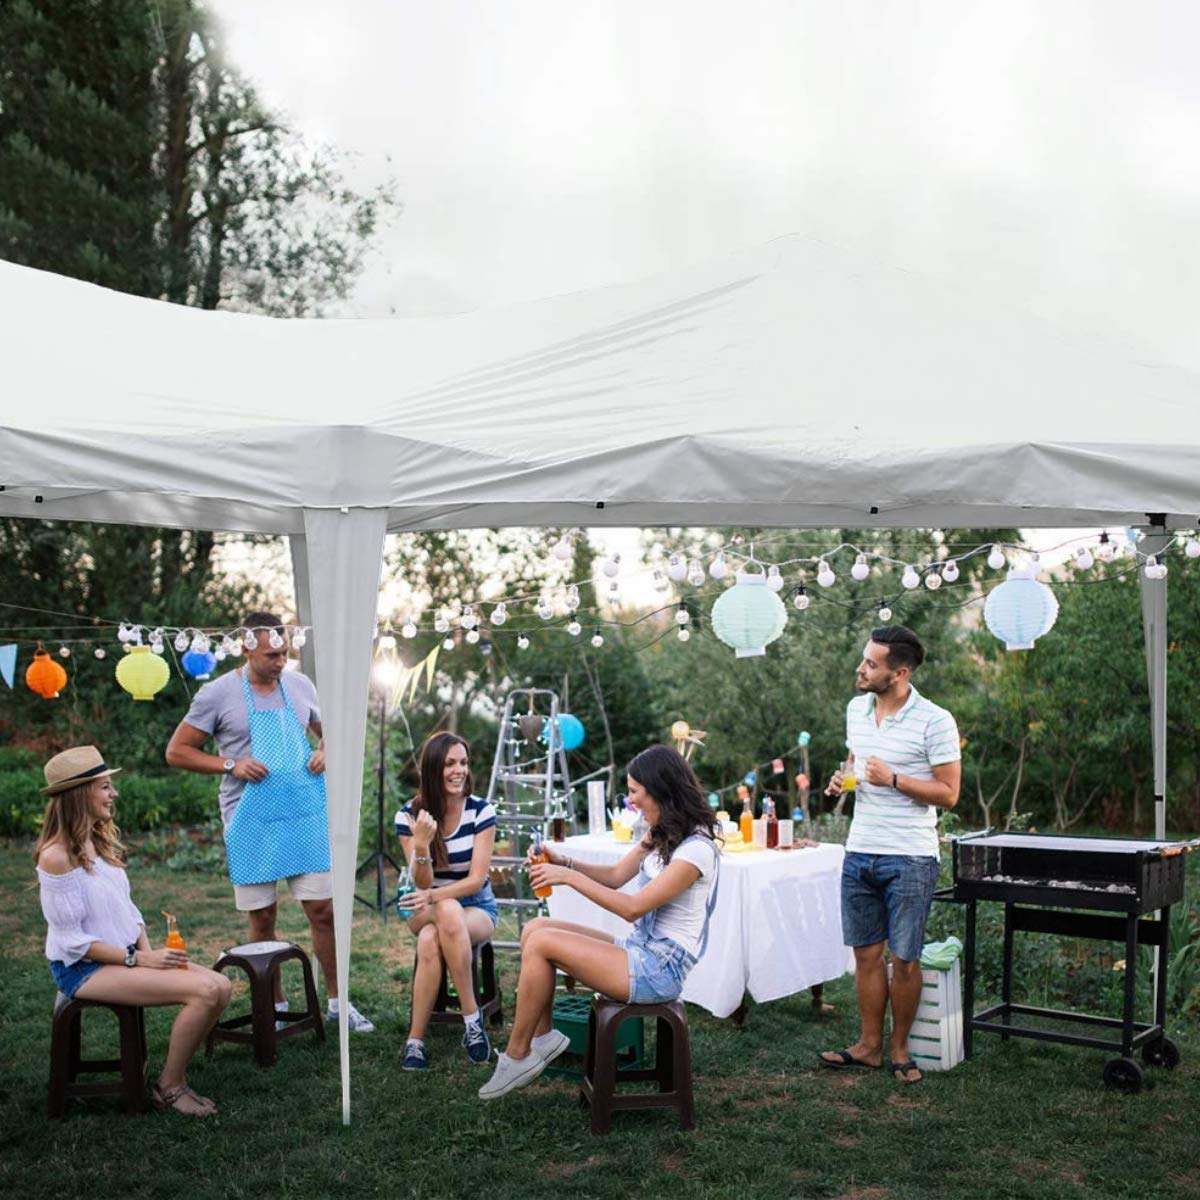 10'x30' Party Canopy Tent Outdoor Wedding Waterproof UV Protection Gazebo Pavilion with 8 Removable Sidewalls Heavy Duty Portable Camping Shelter BBQ Pavilion Canopy Cater Events, White